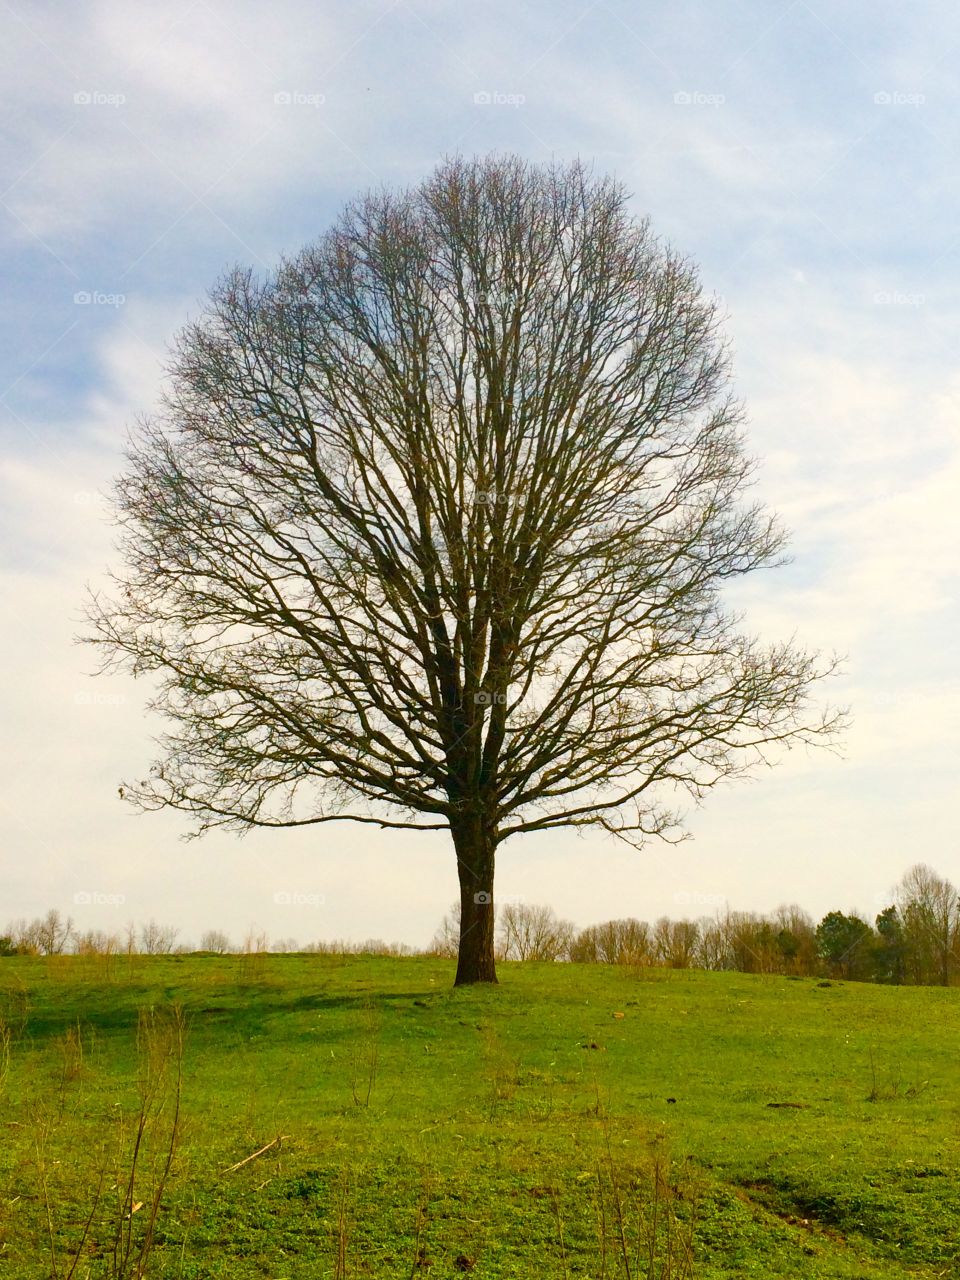 It’s funny how a tree can be just as beautiful, even without its leaves! I captured this picture while visiting my family’s farm. 